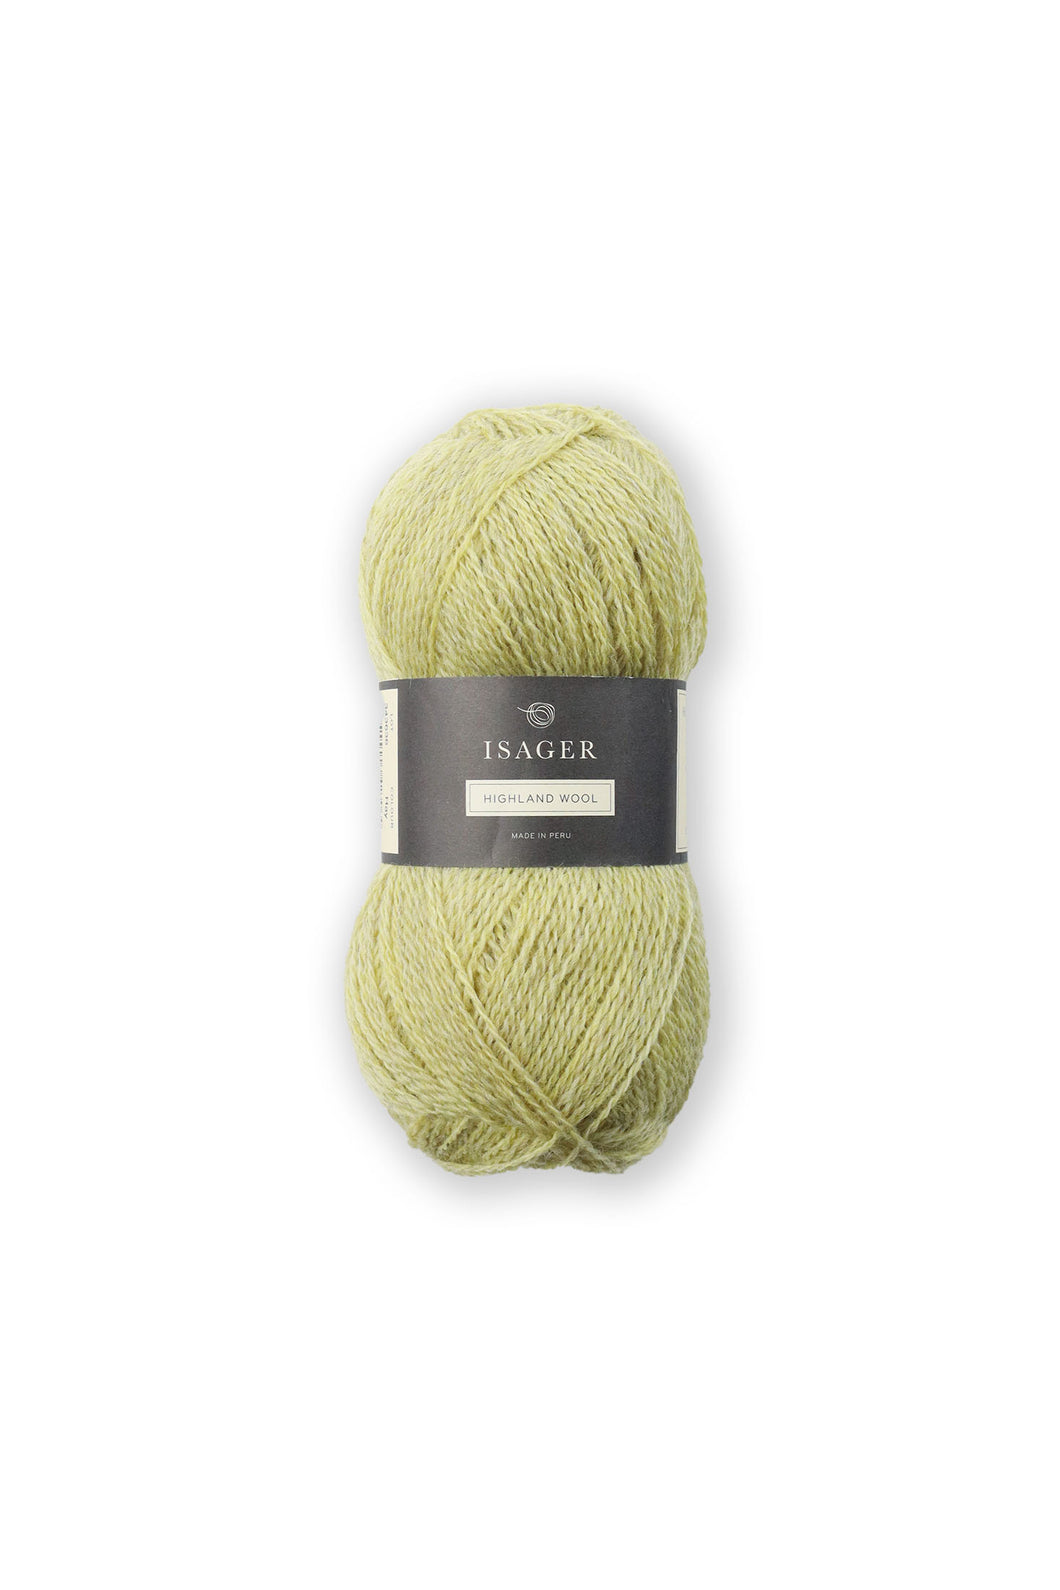 Isager Highland Wool Hay